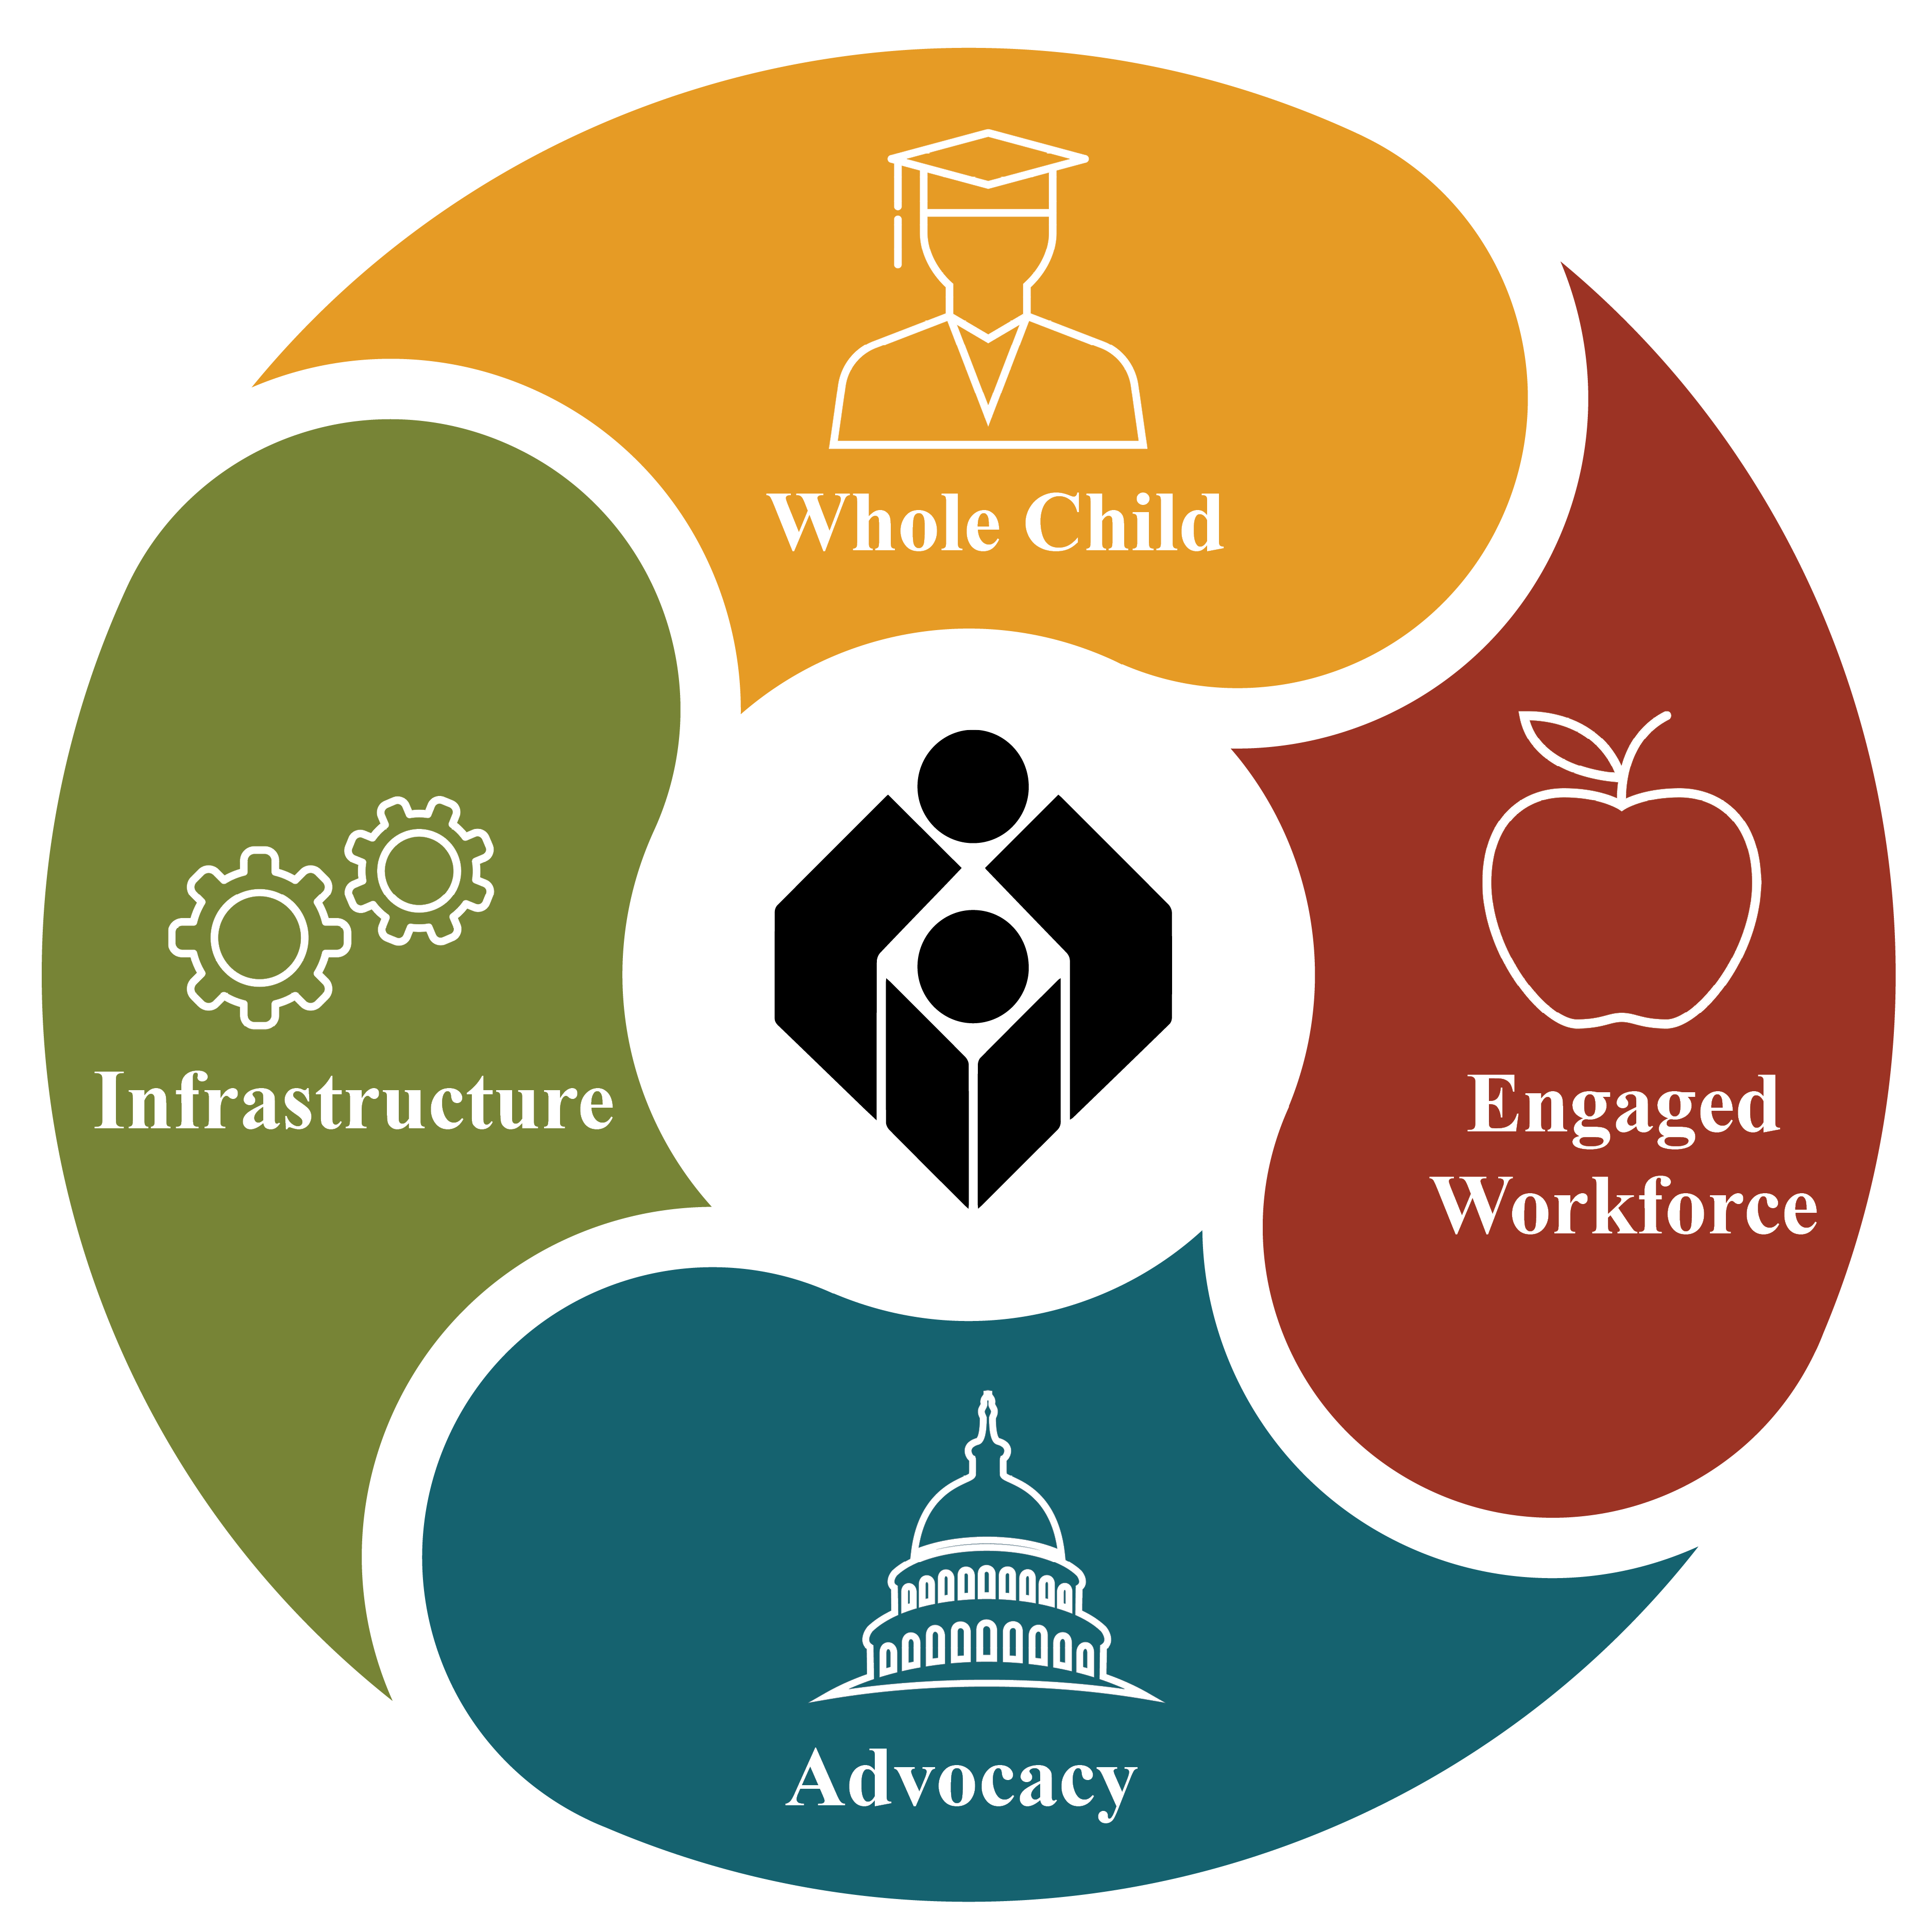 Strategic Plan goals areas: Infrastructure, advocacy, engaged workforce and wholechild